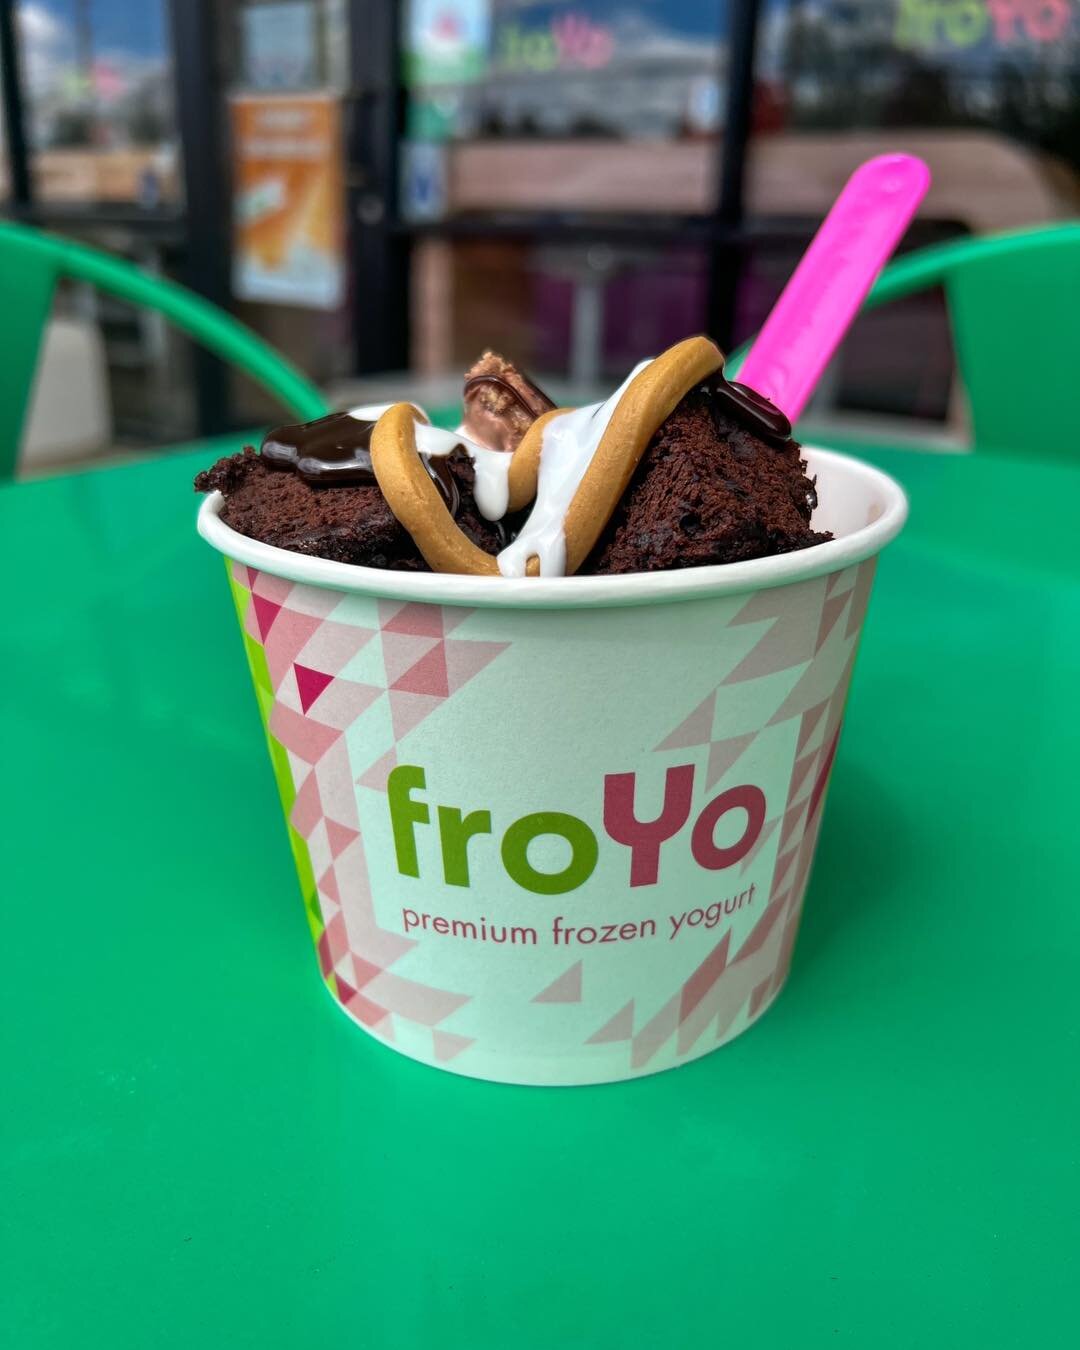 Happy Friday! Indulge in our Dutch chocolate froyo today, topped with Reese's, brownie bits, hot fudge, peanut butter, and marshmallow sauce. It's a decadent treat to kick off the weekend right! #314together #bewellstl #froyostl #gelato #tasteofstl #